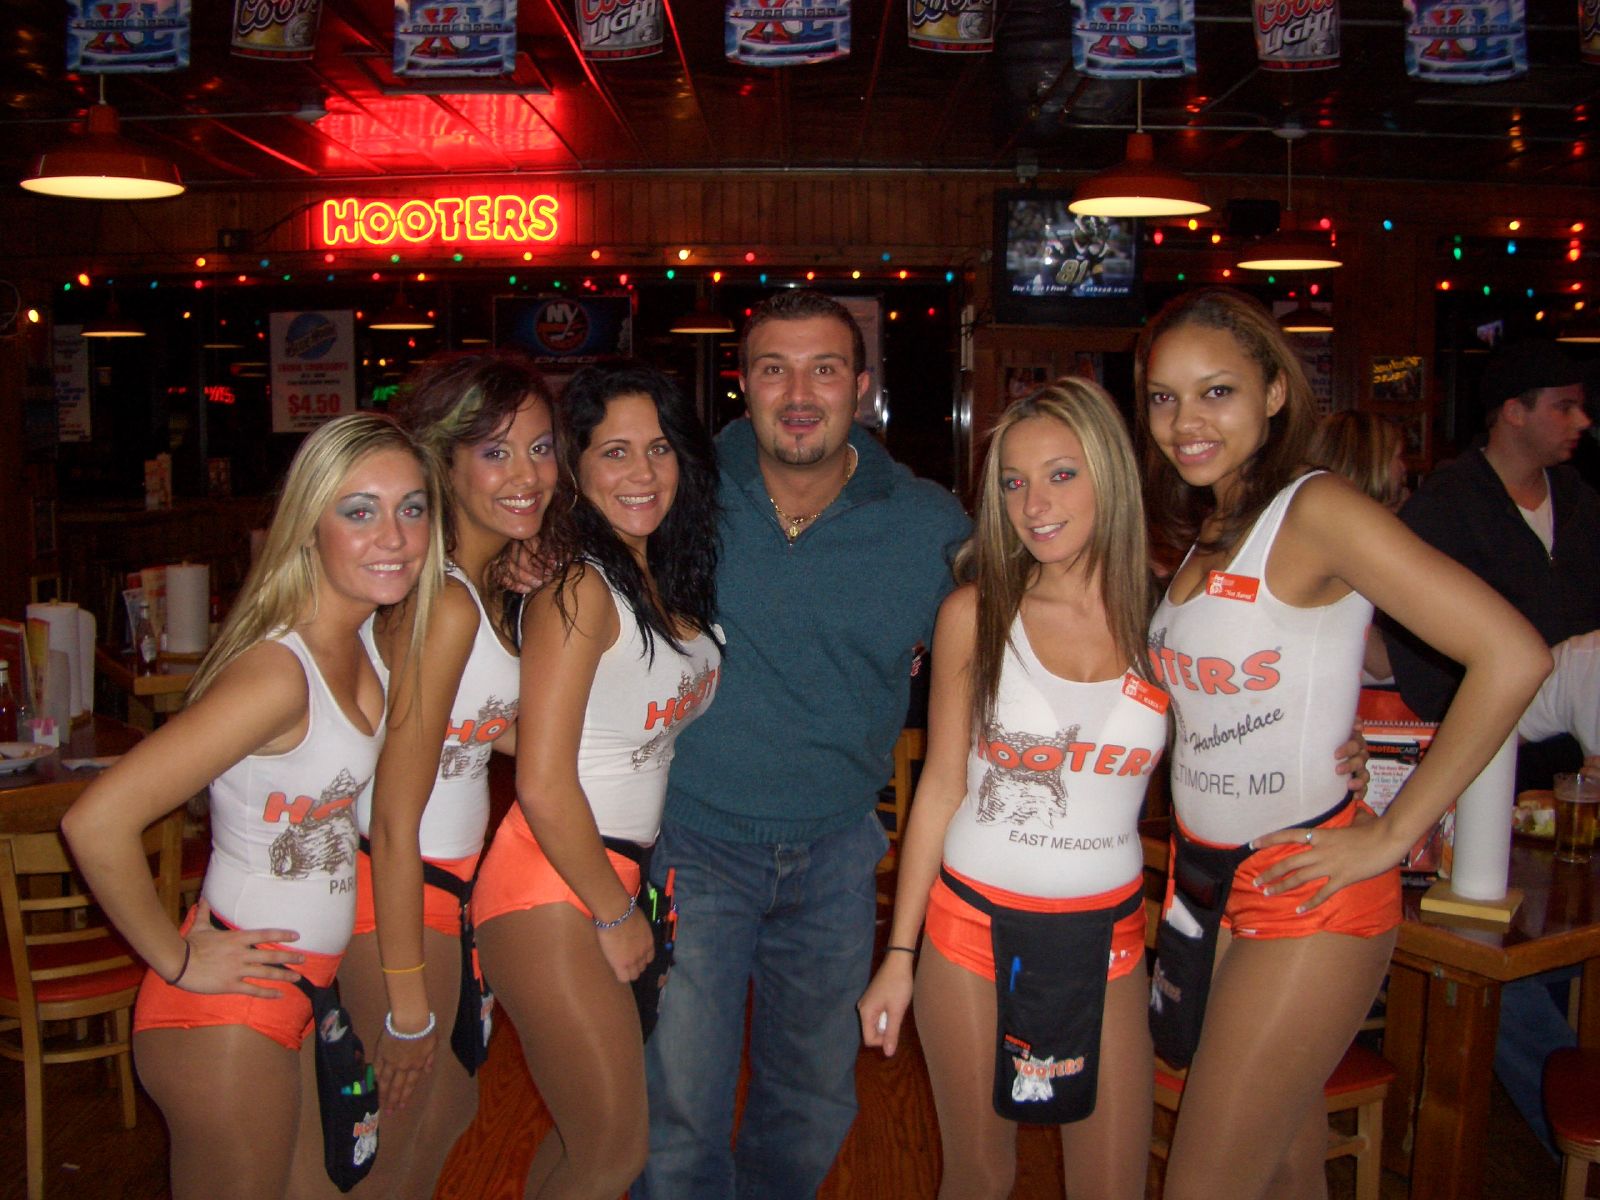 Owns and operates 24 Hooters Restaurant locations in Tampa Bay Chicago area...